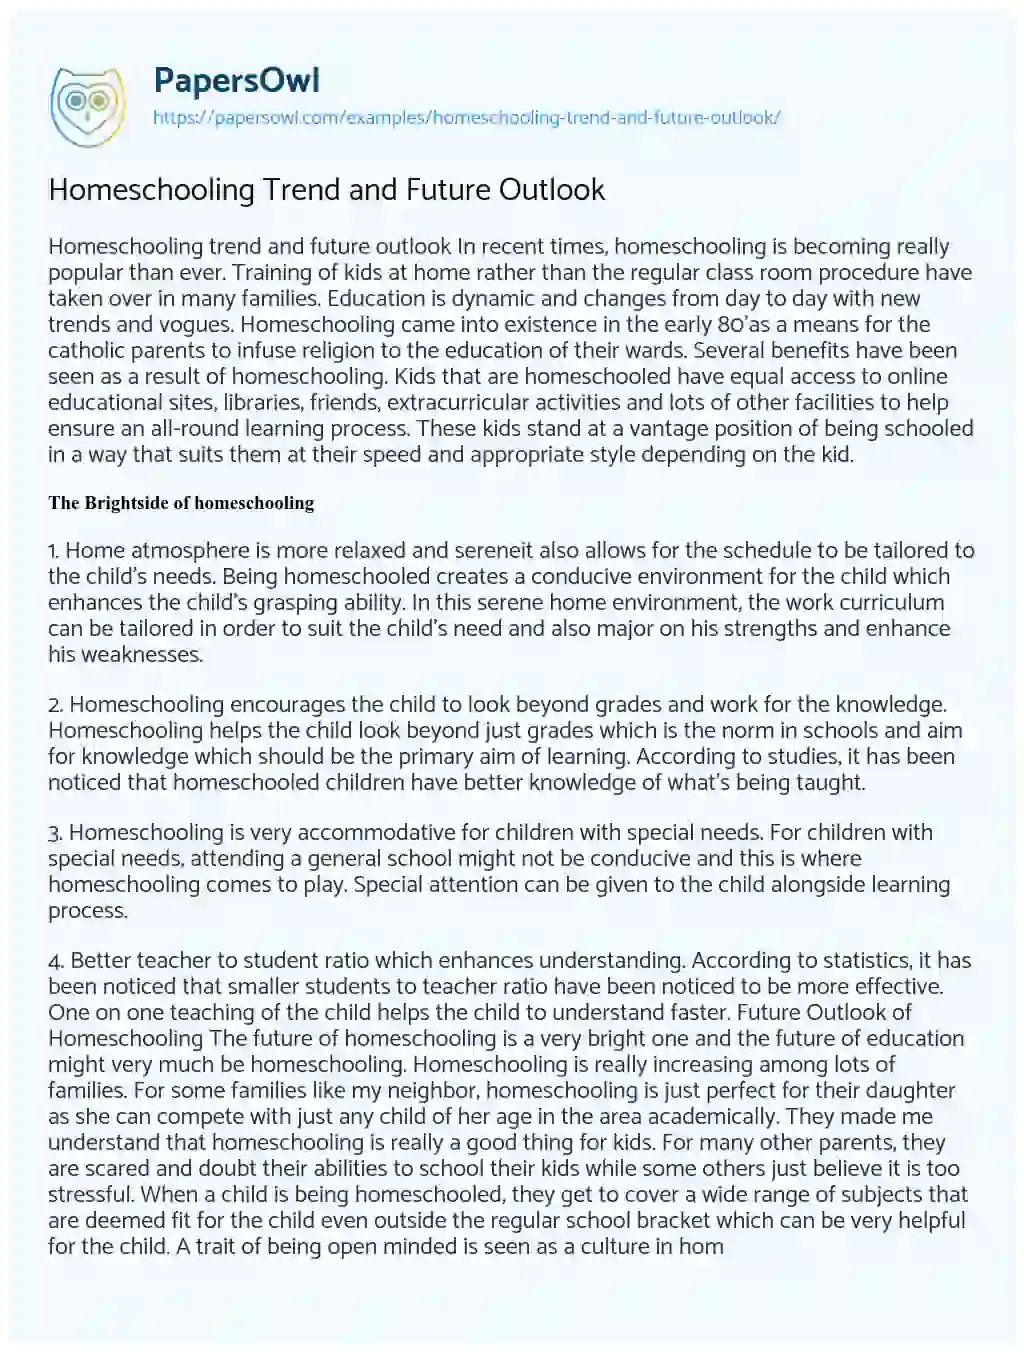 Essay on Homeschooling Trend and Future Outlook